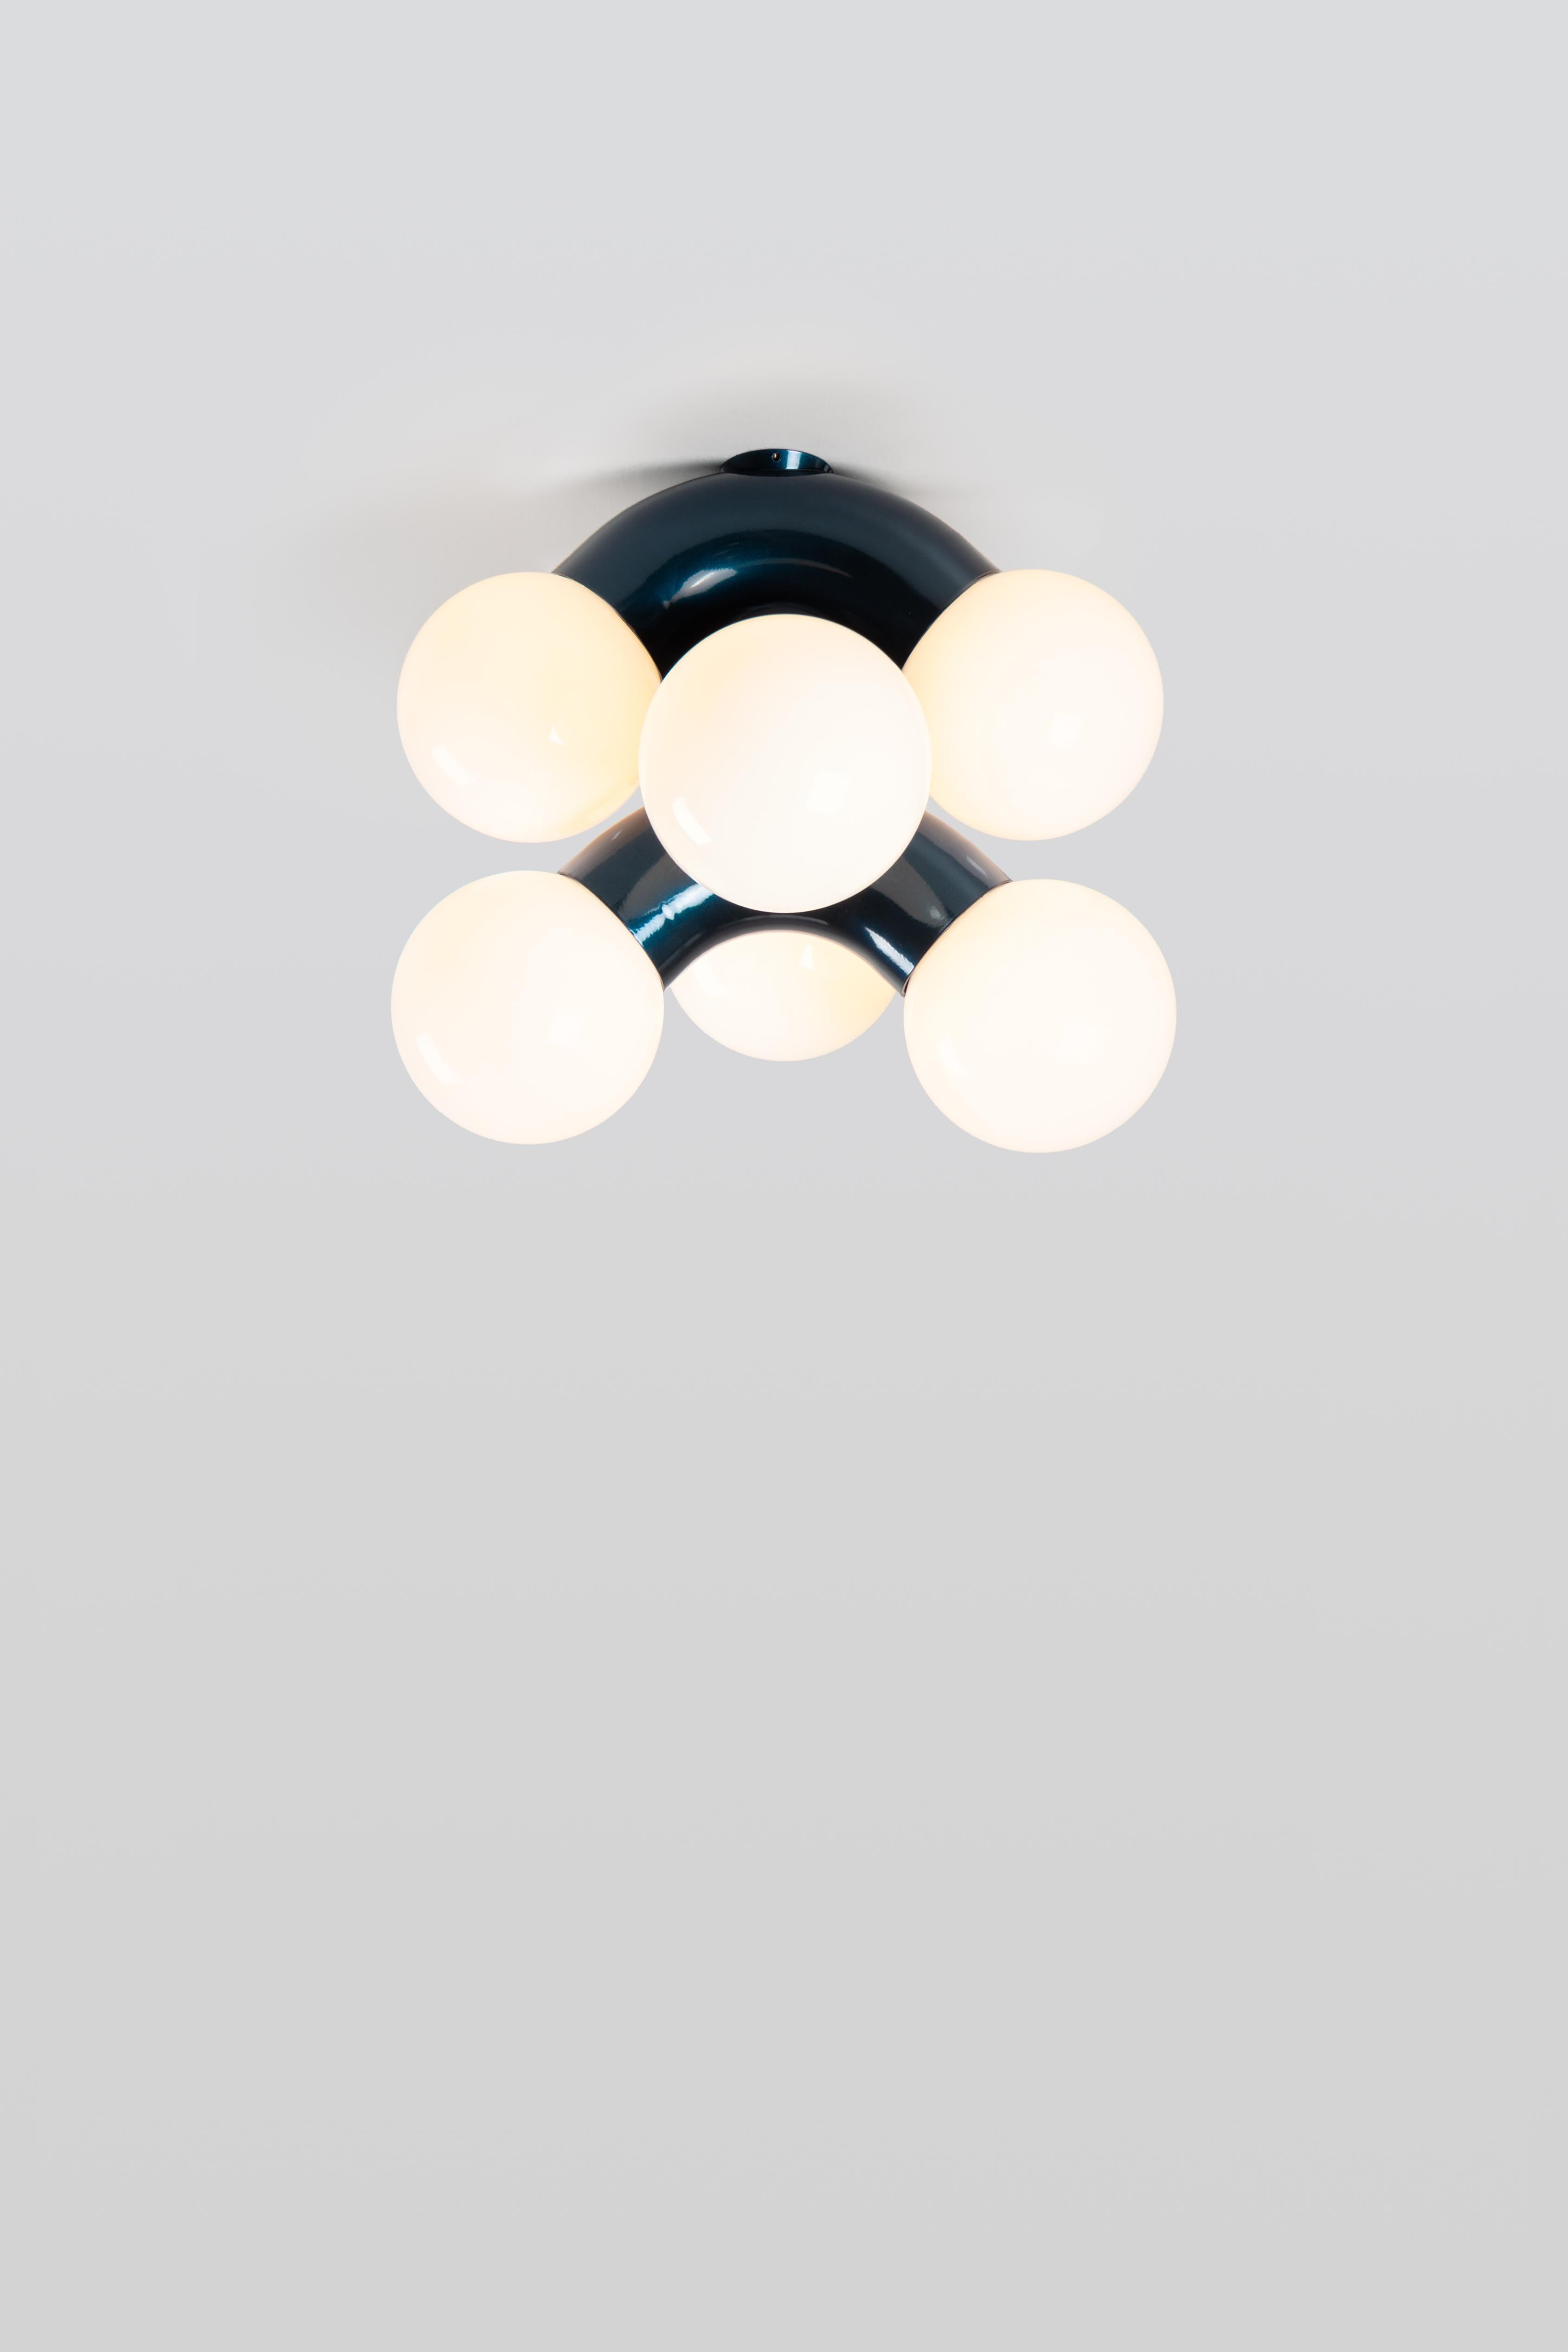 VINE 3-C, ceiling lamp
Design: Caine Heintzman, Editor: ANDLight

The vine ceiling lamp combines exaggerated form with the propensity for repetition resulting in an ambitious vertically scaling fixture.

Materials
– Chromed steel
– Opal glass